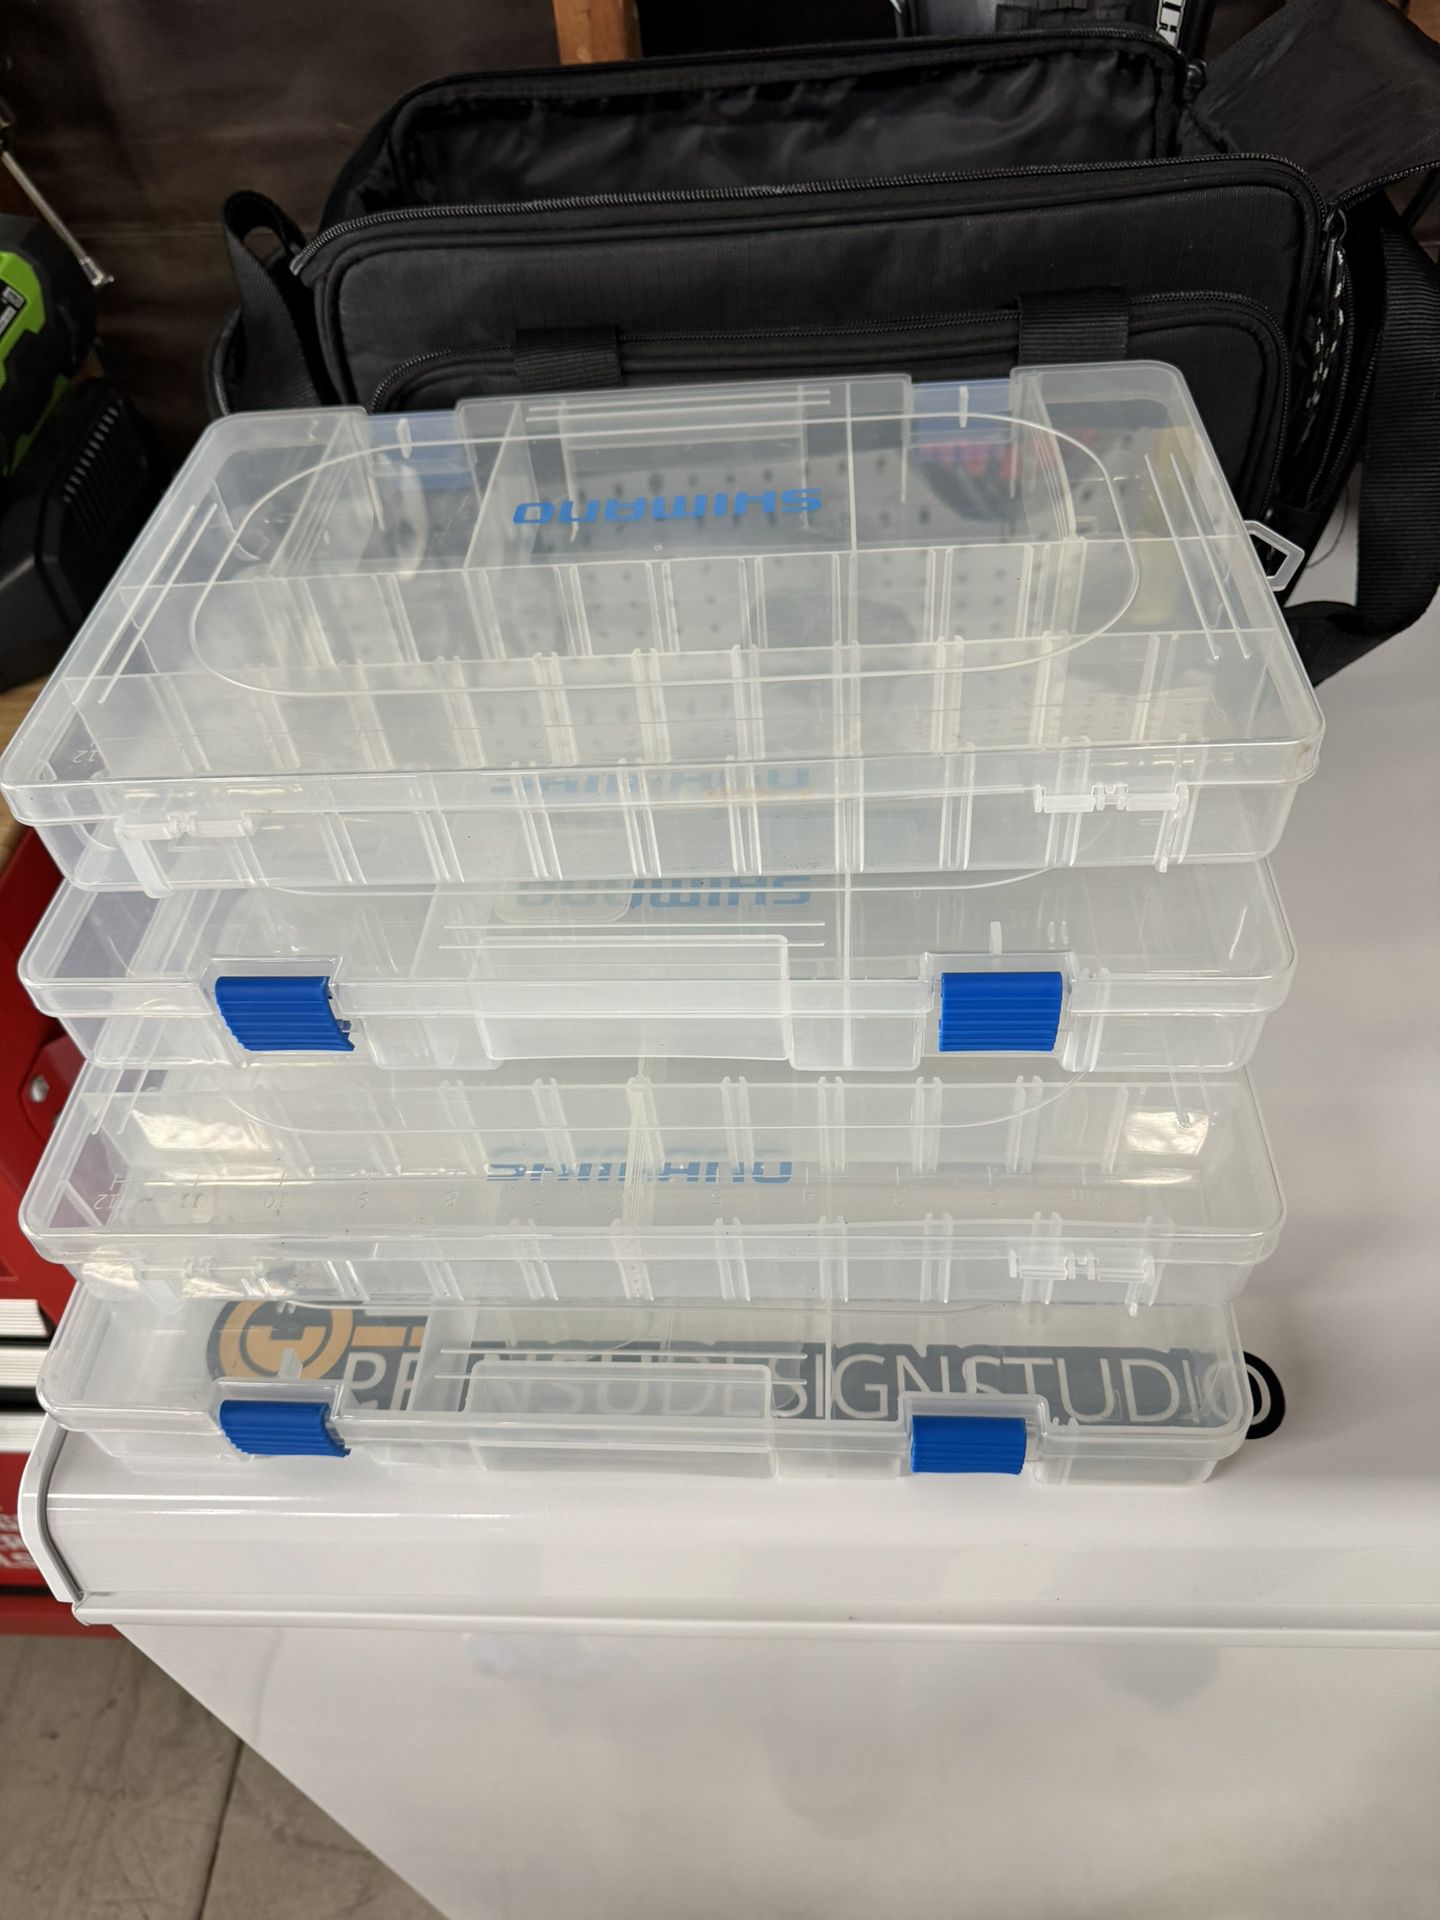 Shimano Tackle Bag for Sale in Carlsbad, CA - OfferUp